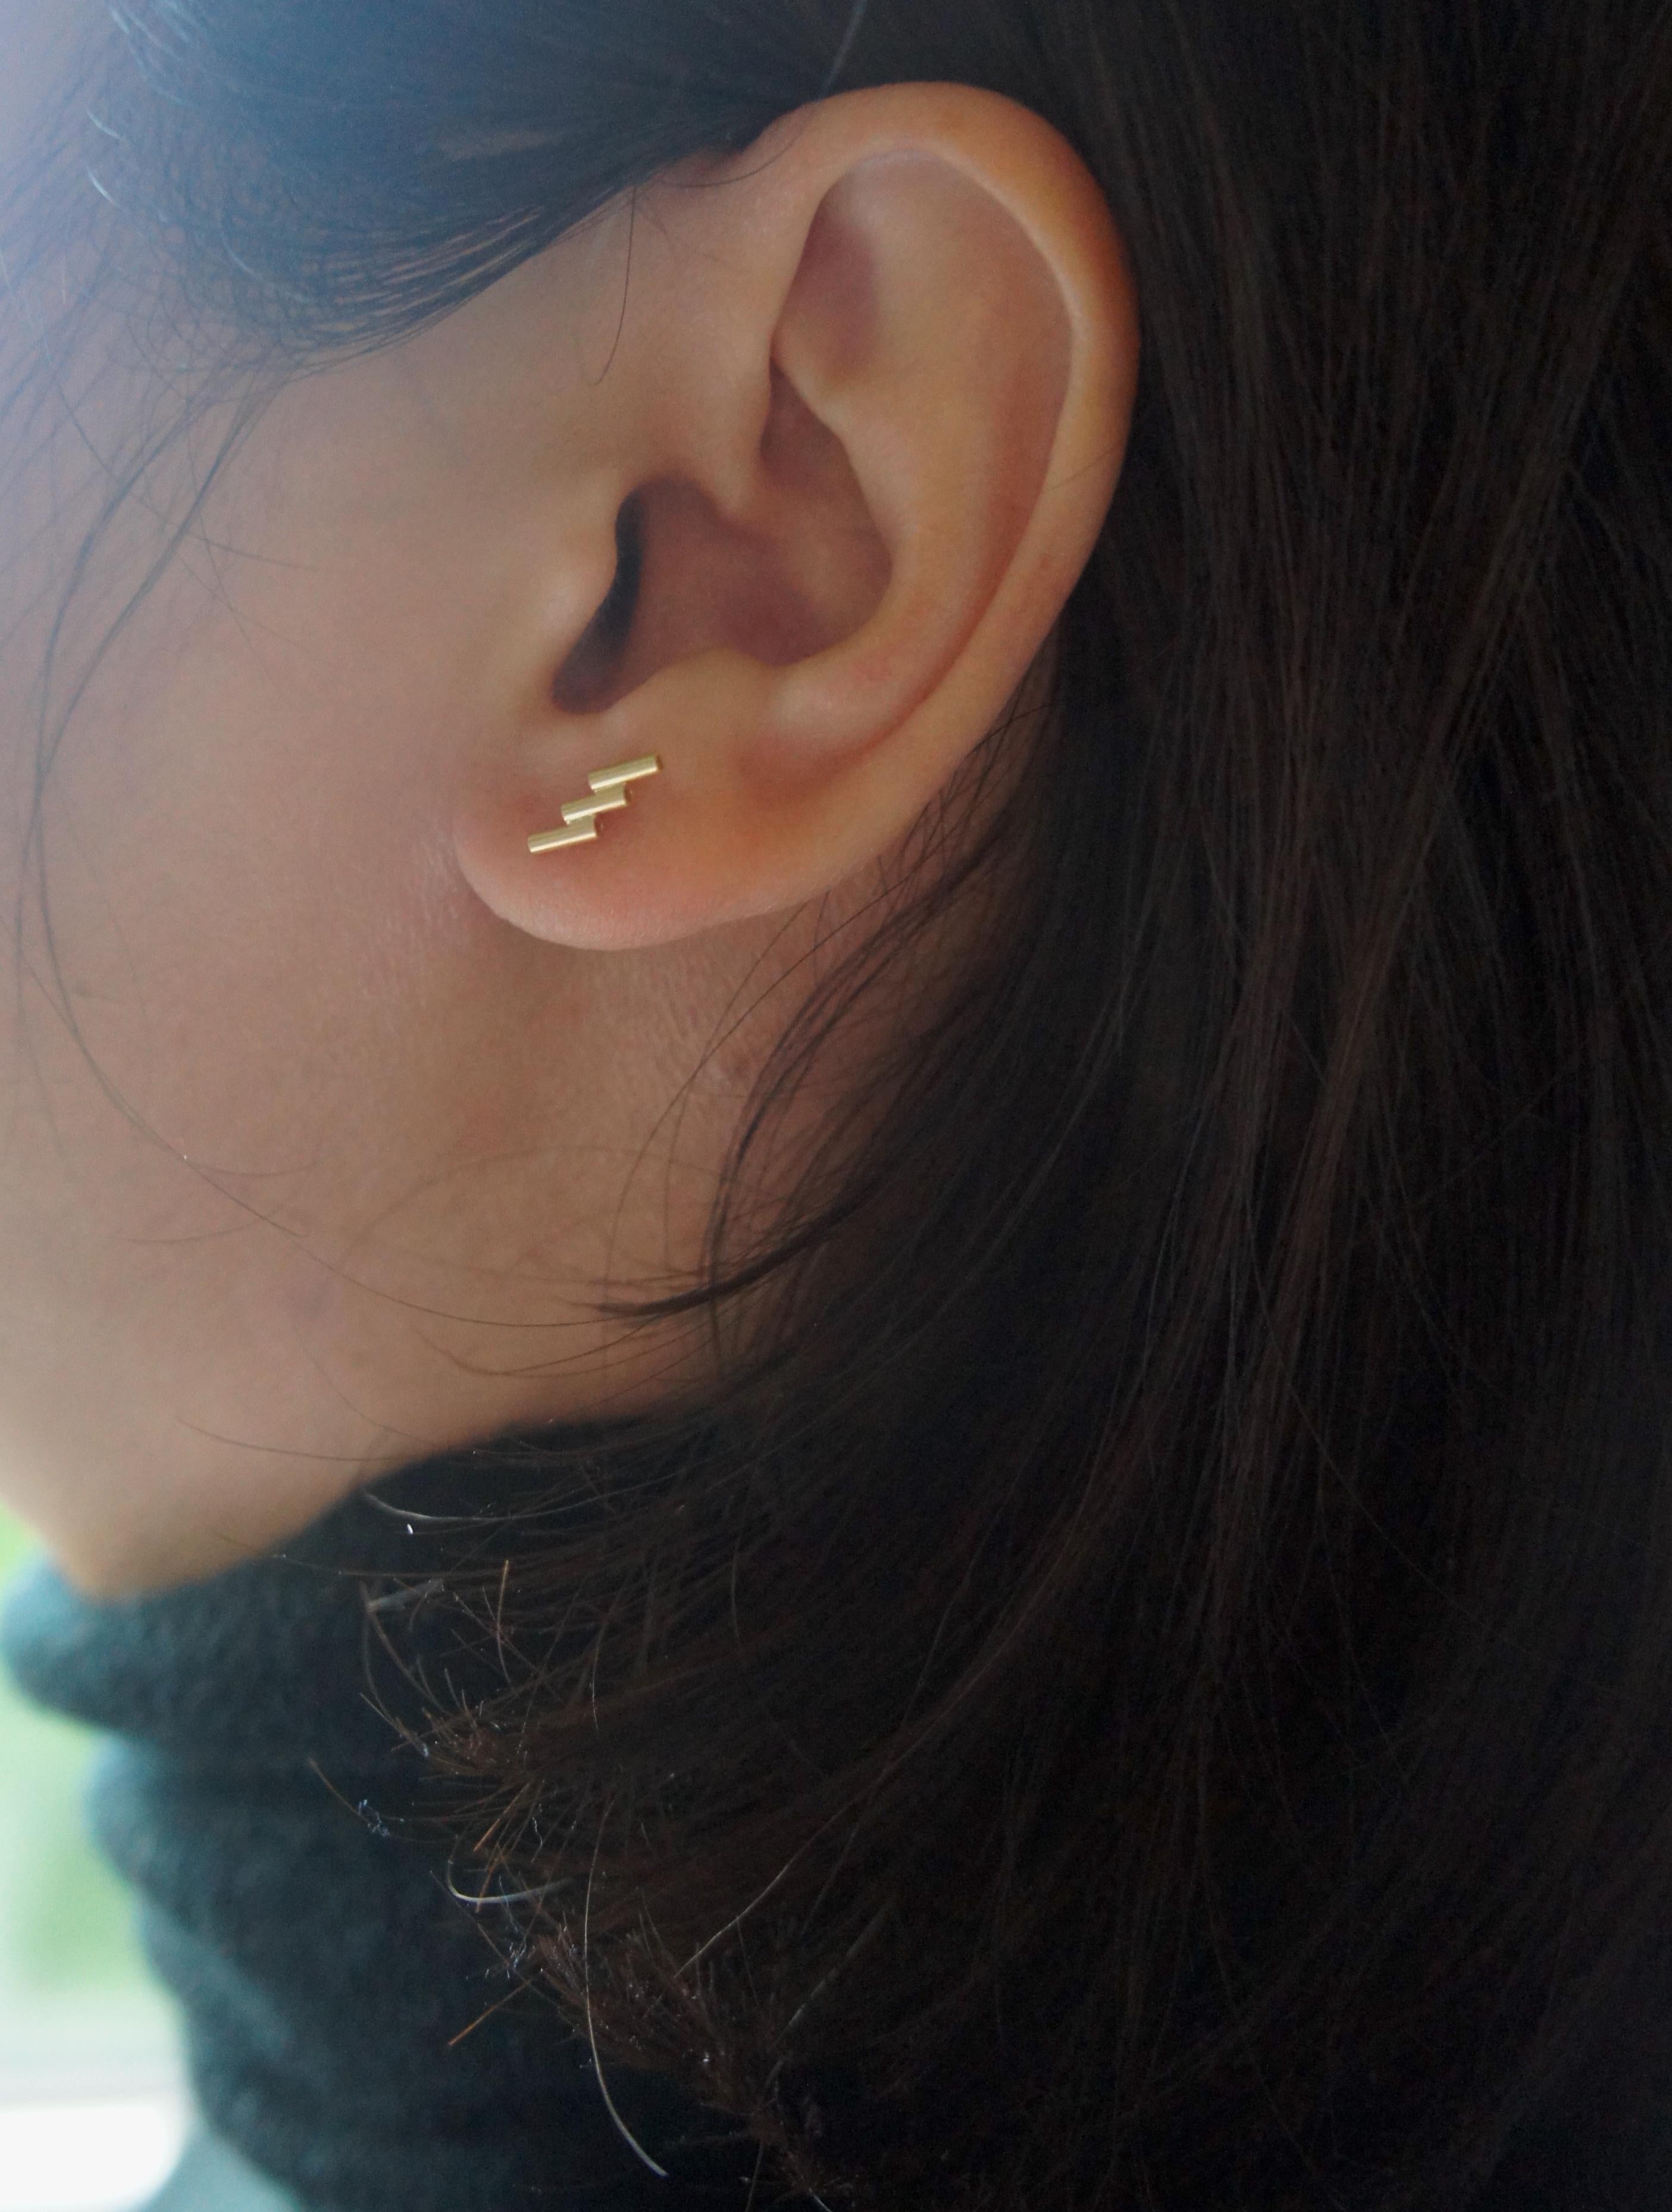 The Making Marks collection presents 18-karat yellow gold stud earrings, featuring the maker's hand-forged marks and a brushed texture. The minimal and playful design of this collection makes it perfect for everyday wear and a great gift option.